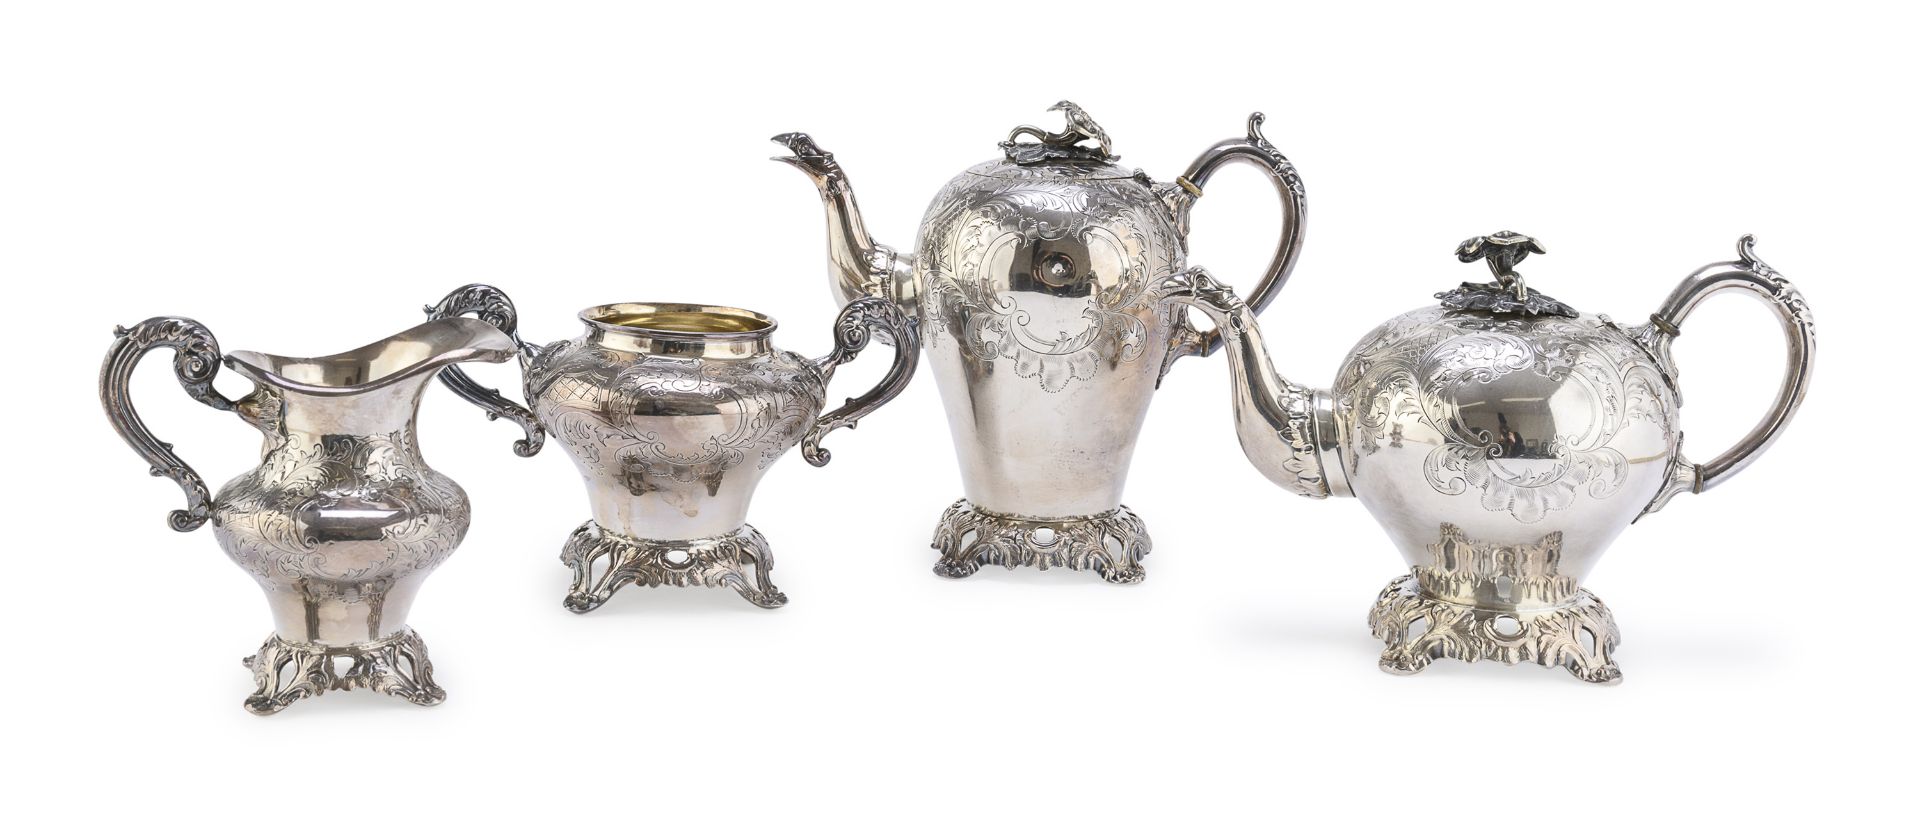 TEA AND COFFEE SET IN SHEFFIELD UK EARLY 20TH CENTURY